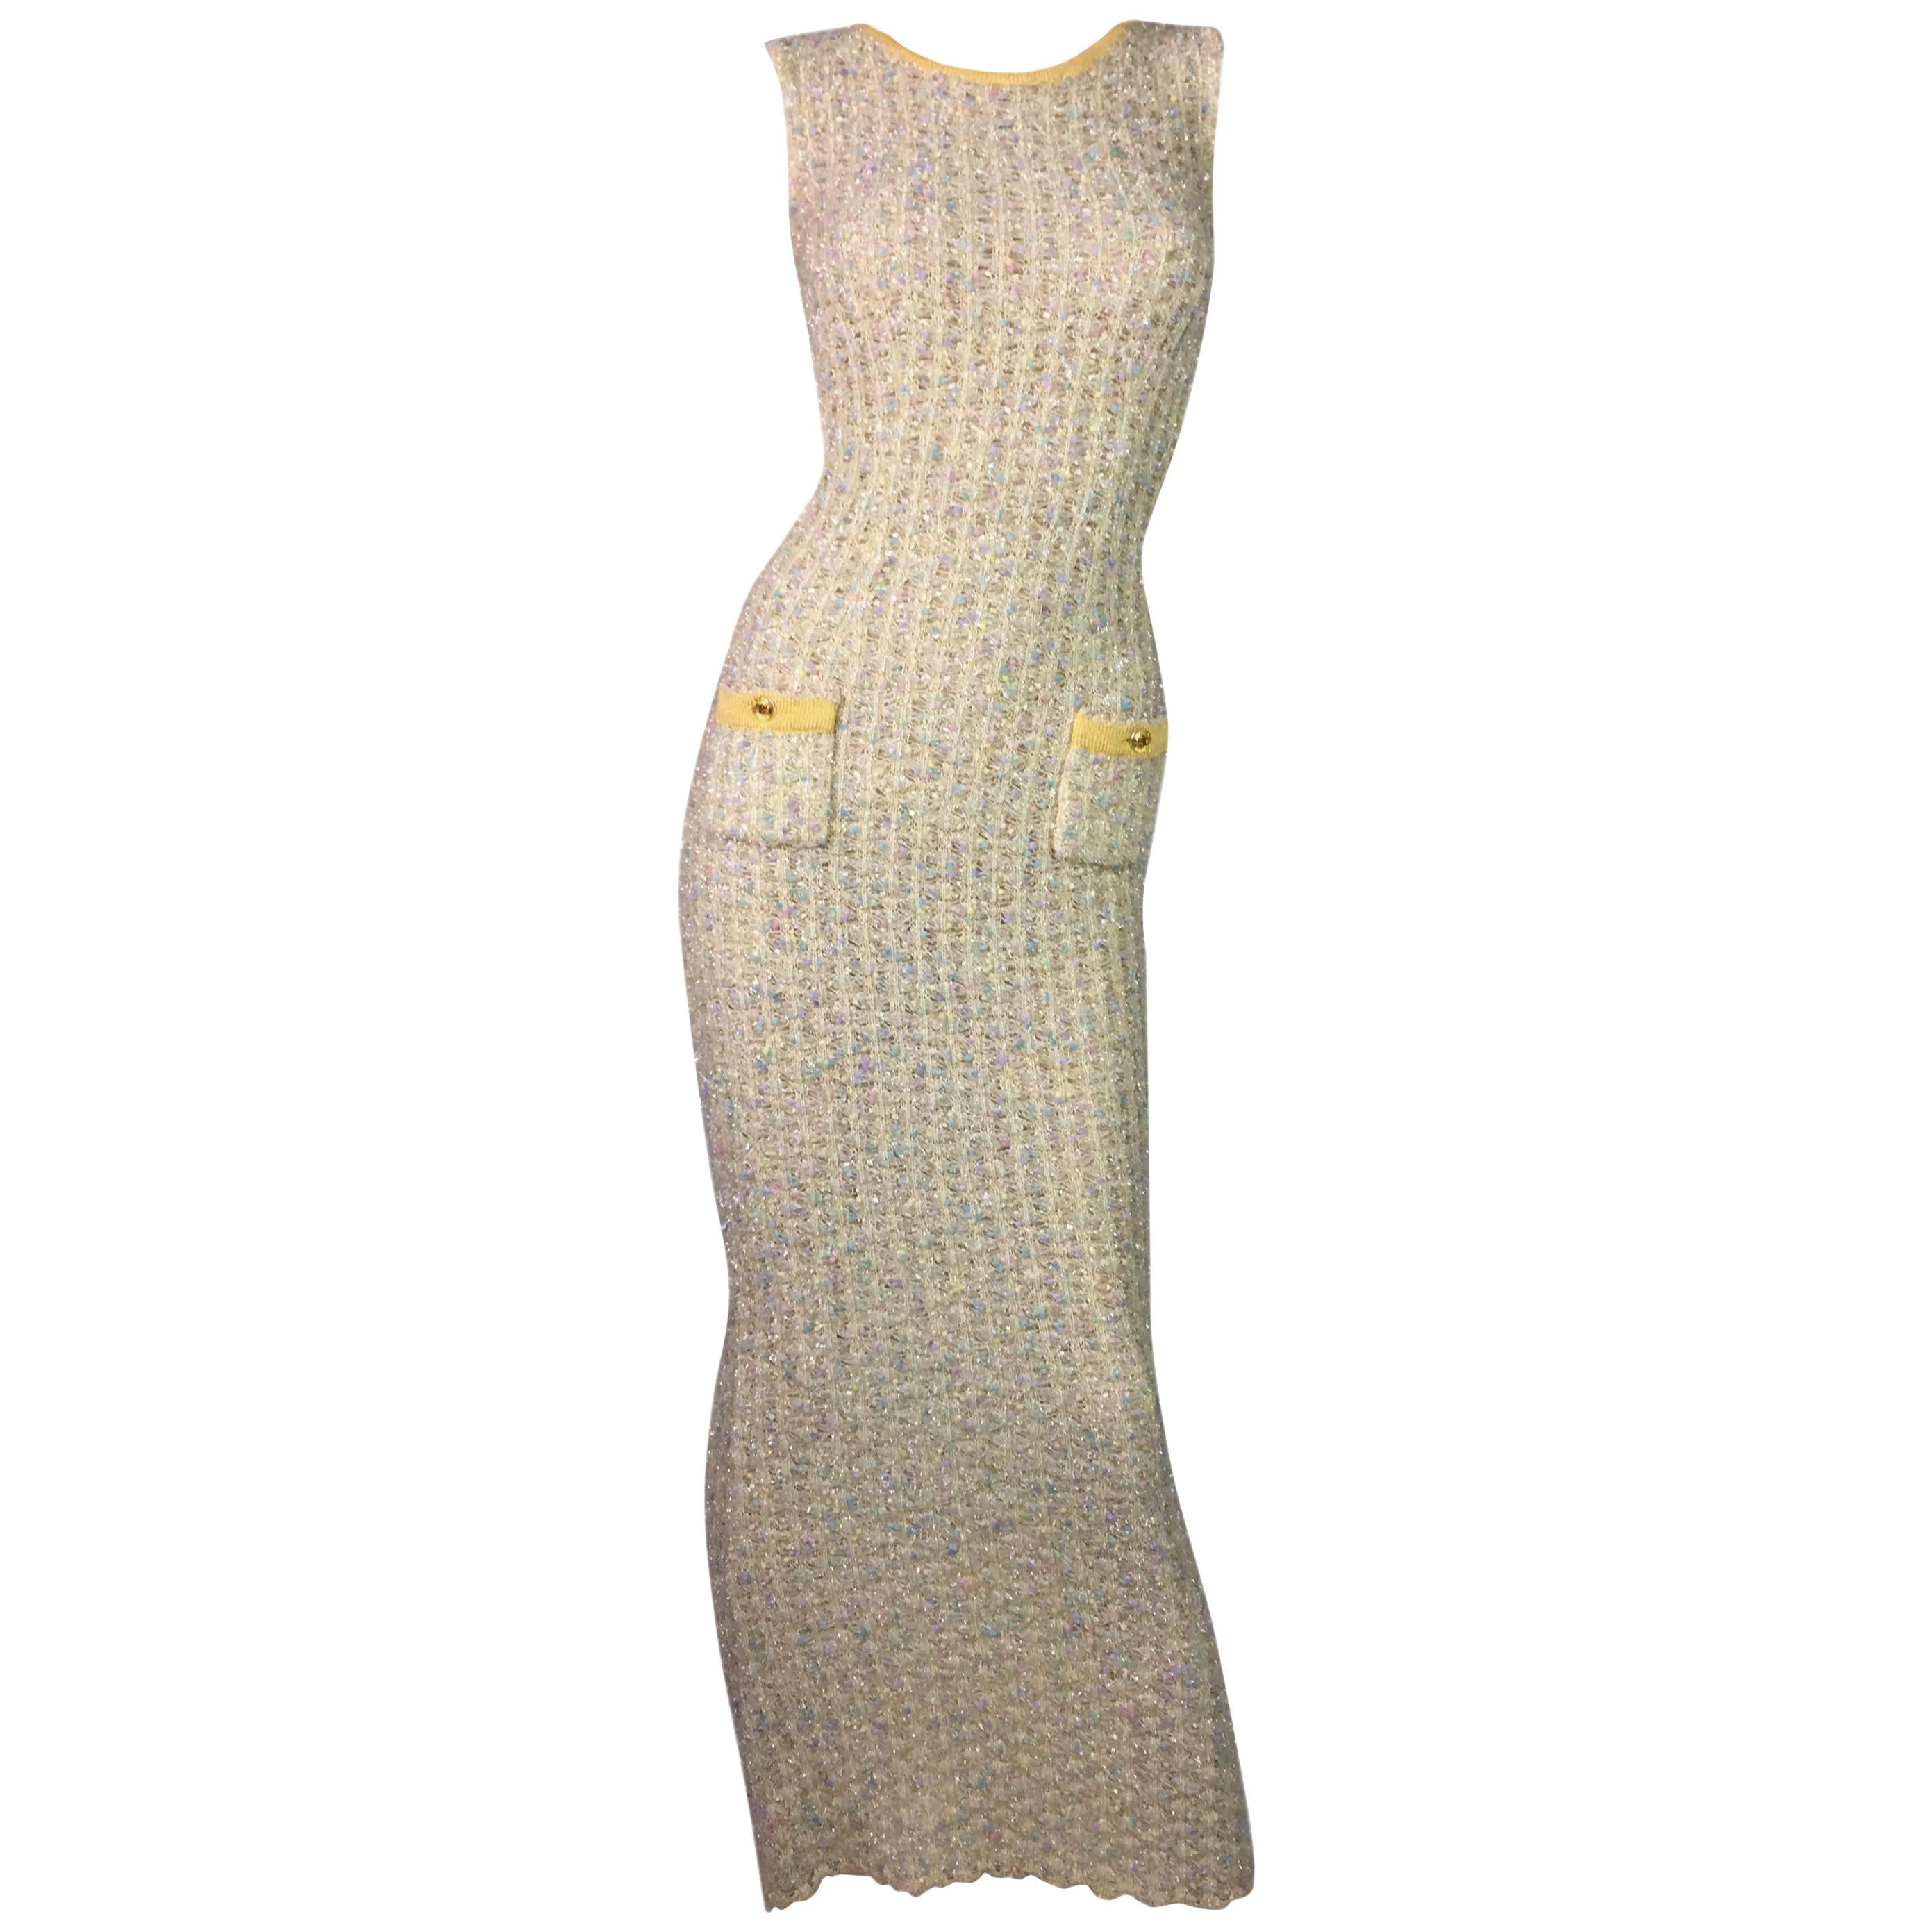 S/S 1997 Chanel Sheer Knit Plunging Back Confetti Tweed Wiggle Long Dress